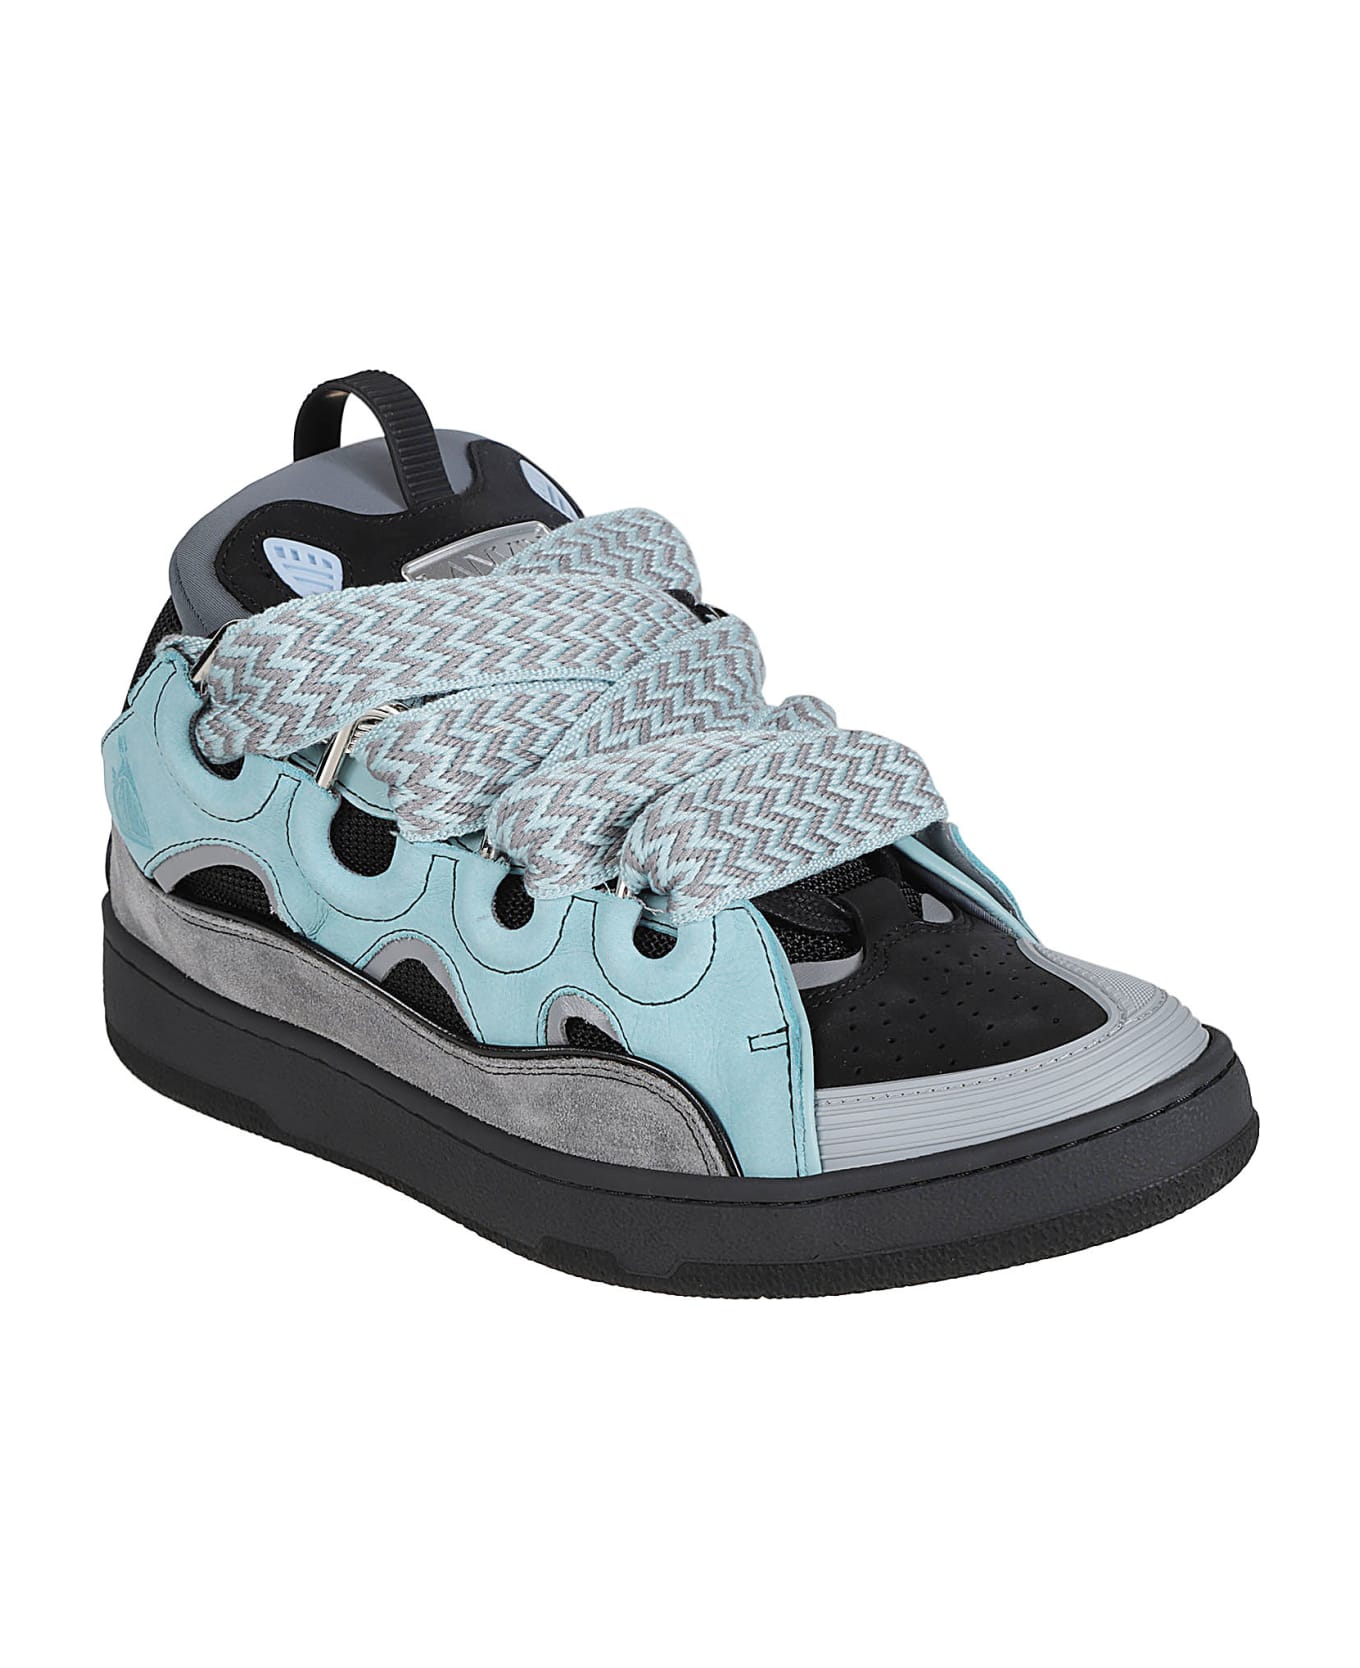 Lanvin Curb Sneakers - Light Blue/Anthracite